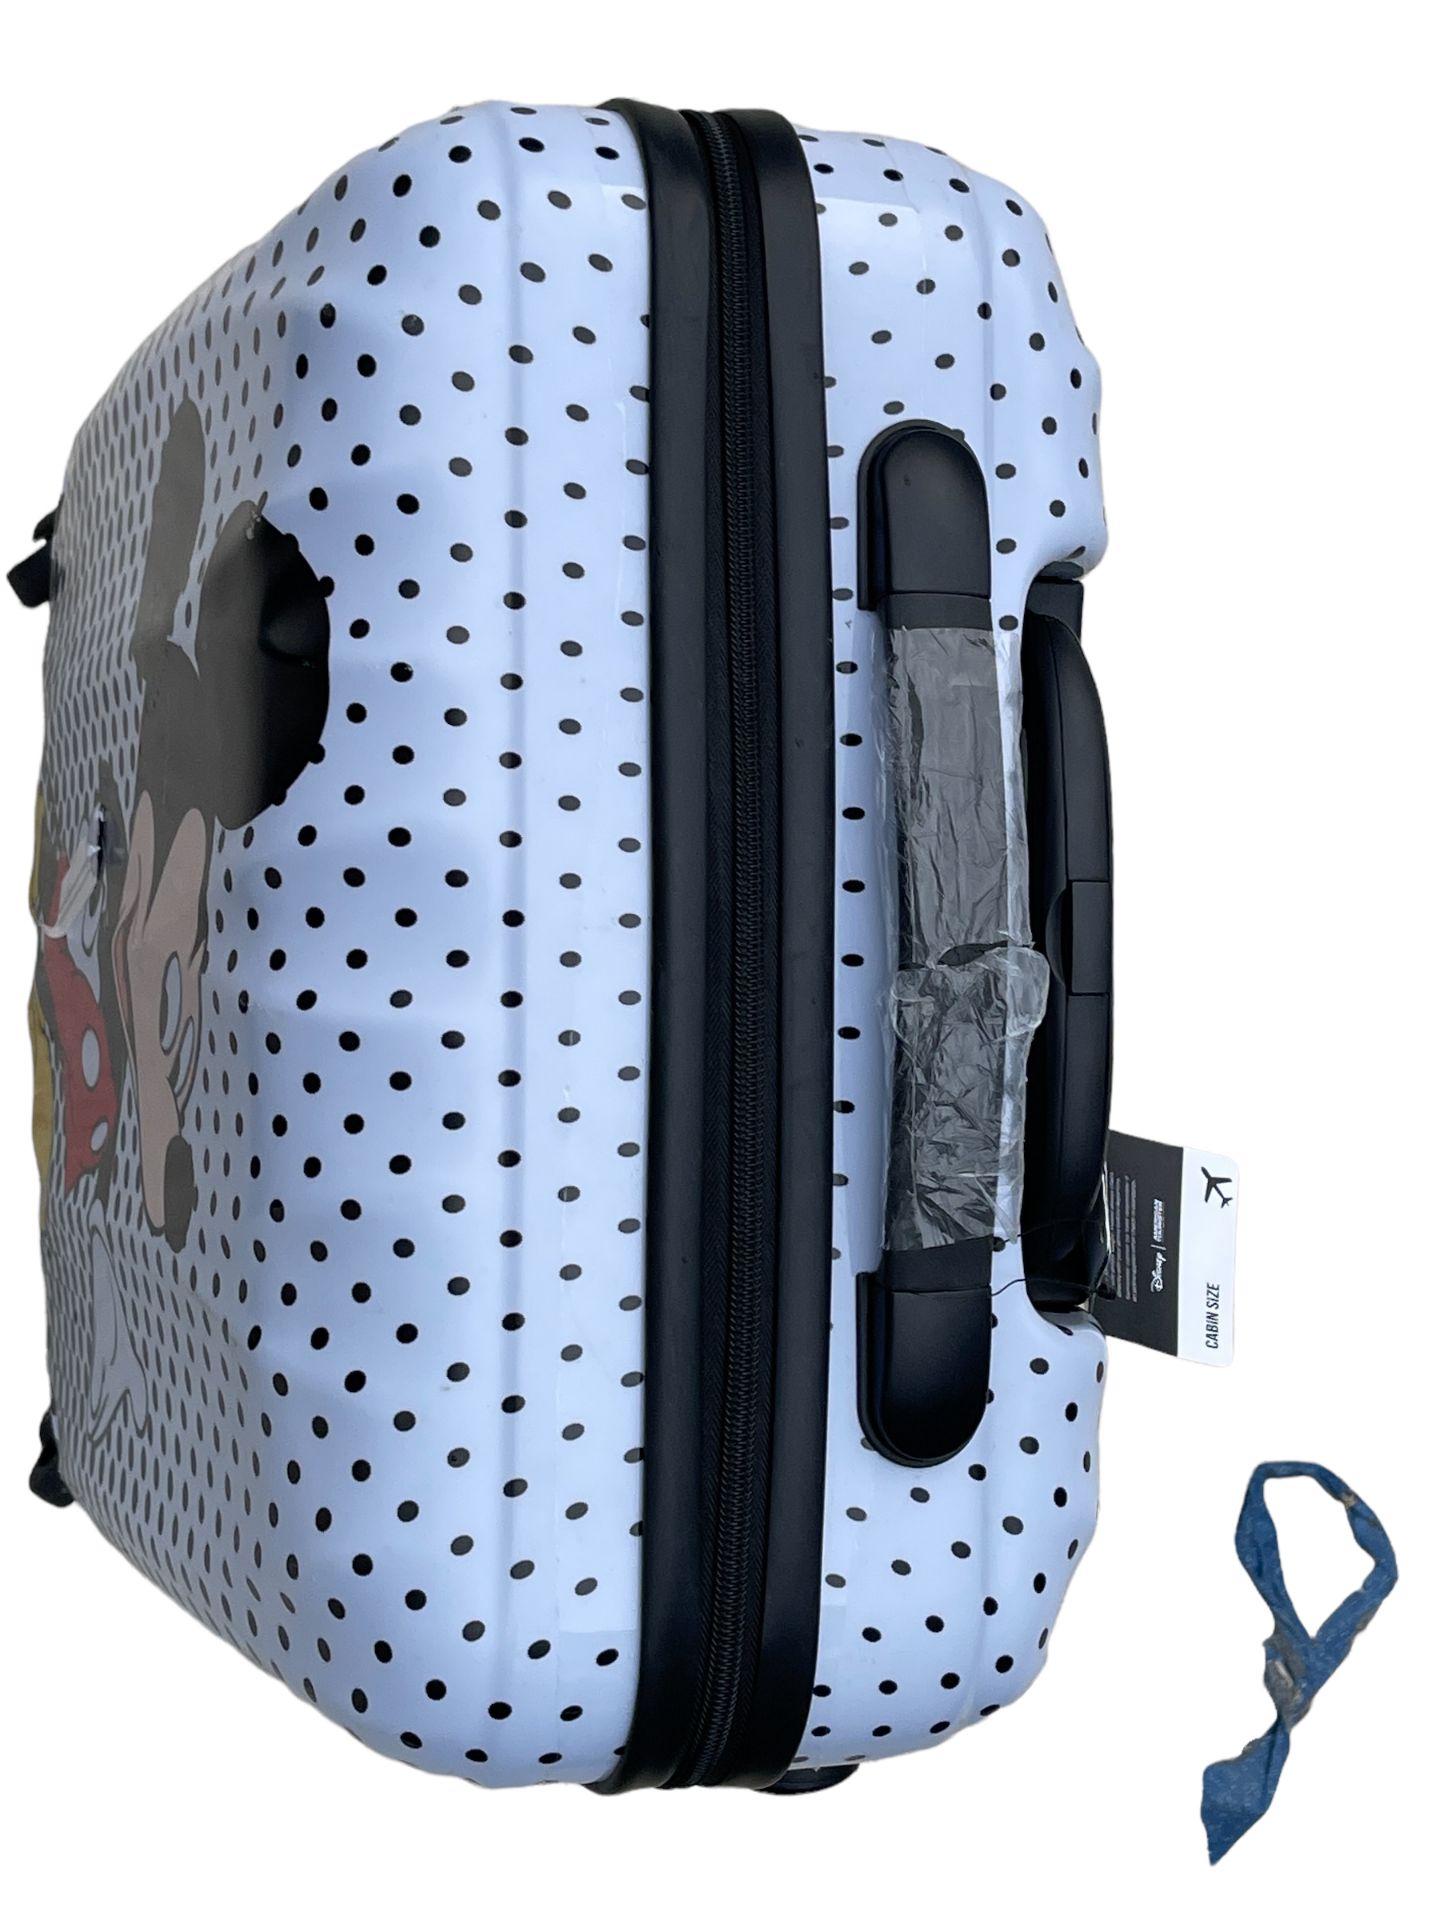 American Tourister Disney Mickey Mouse Polka Dot Carry-on Spinner Case 55cm - RRP £145 - Image 6 of 9